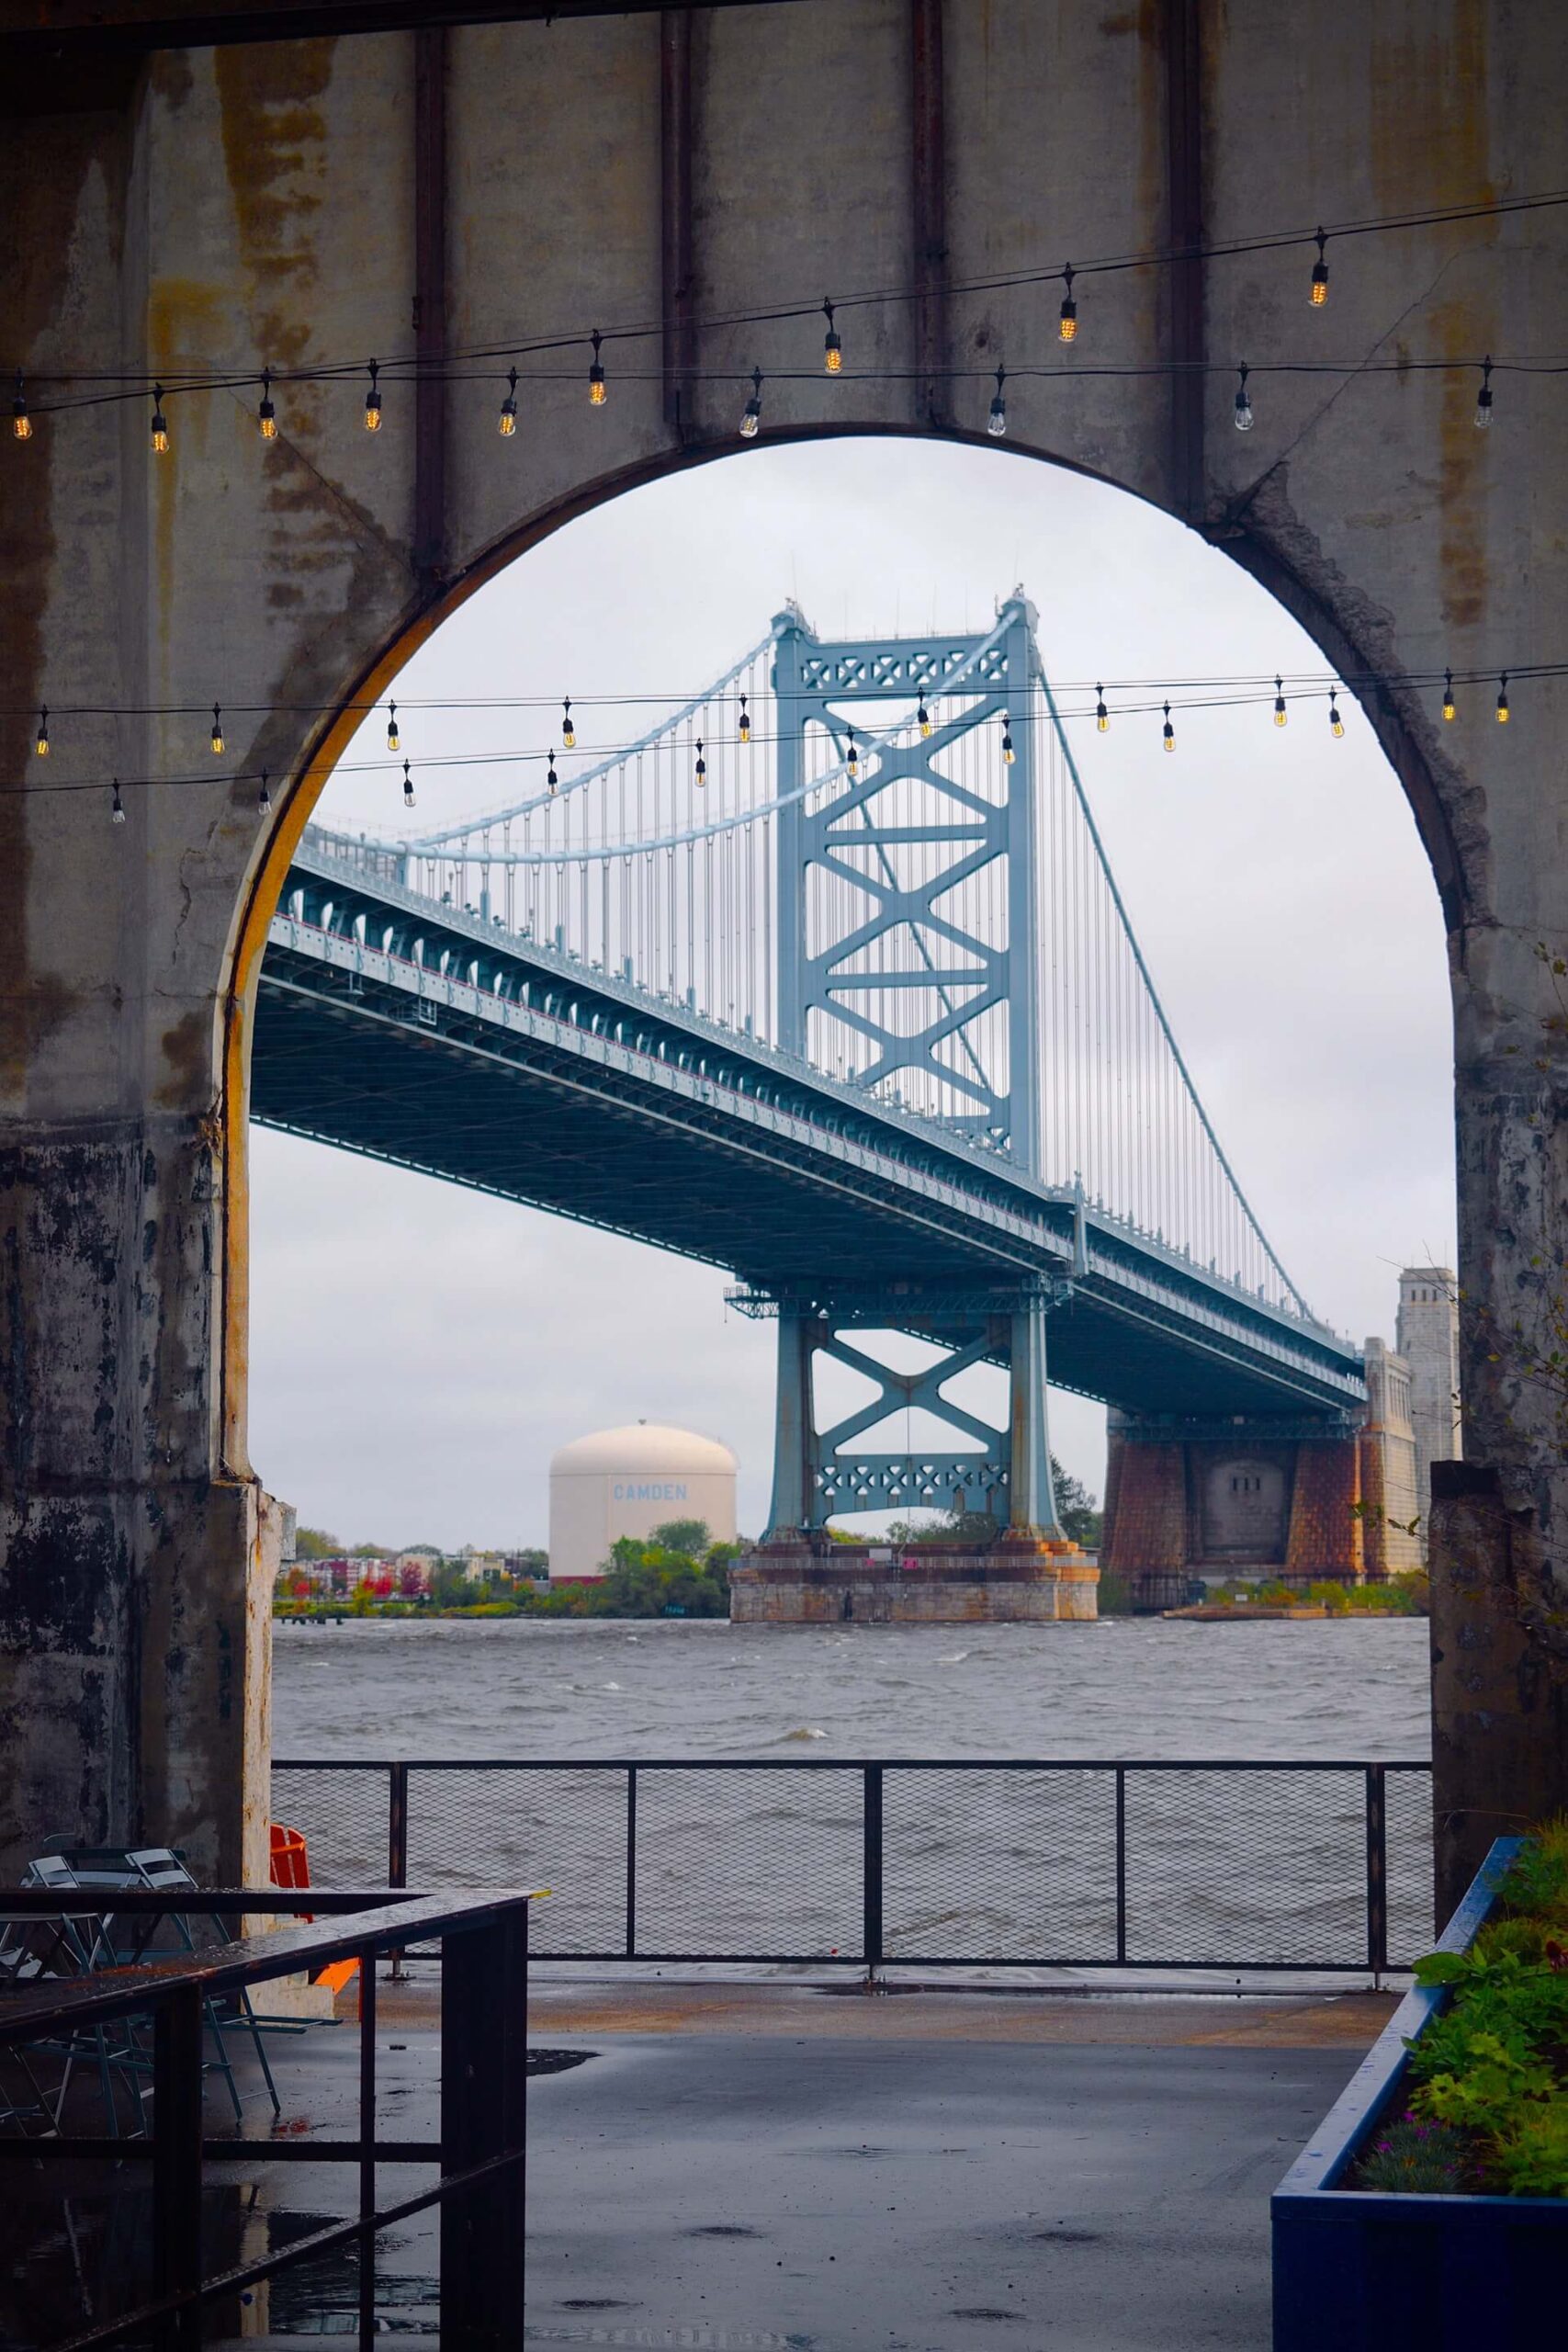 view of ben franklin bridge from somewhere underneath near the water